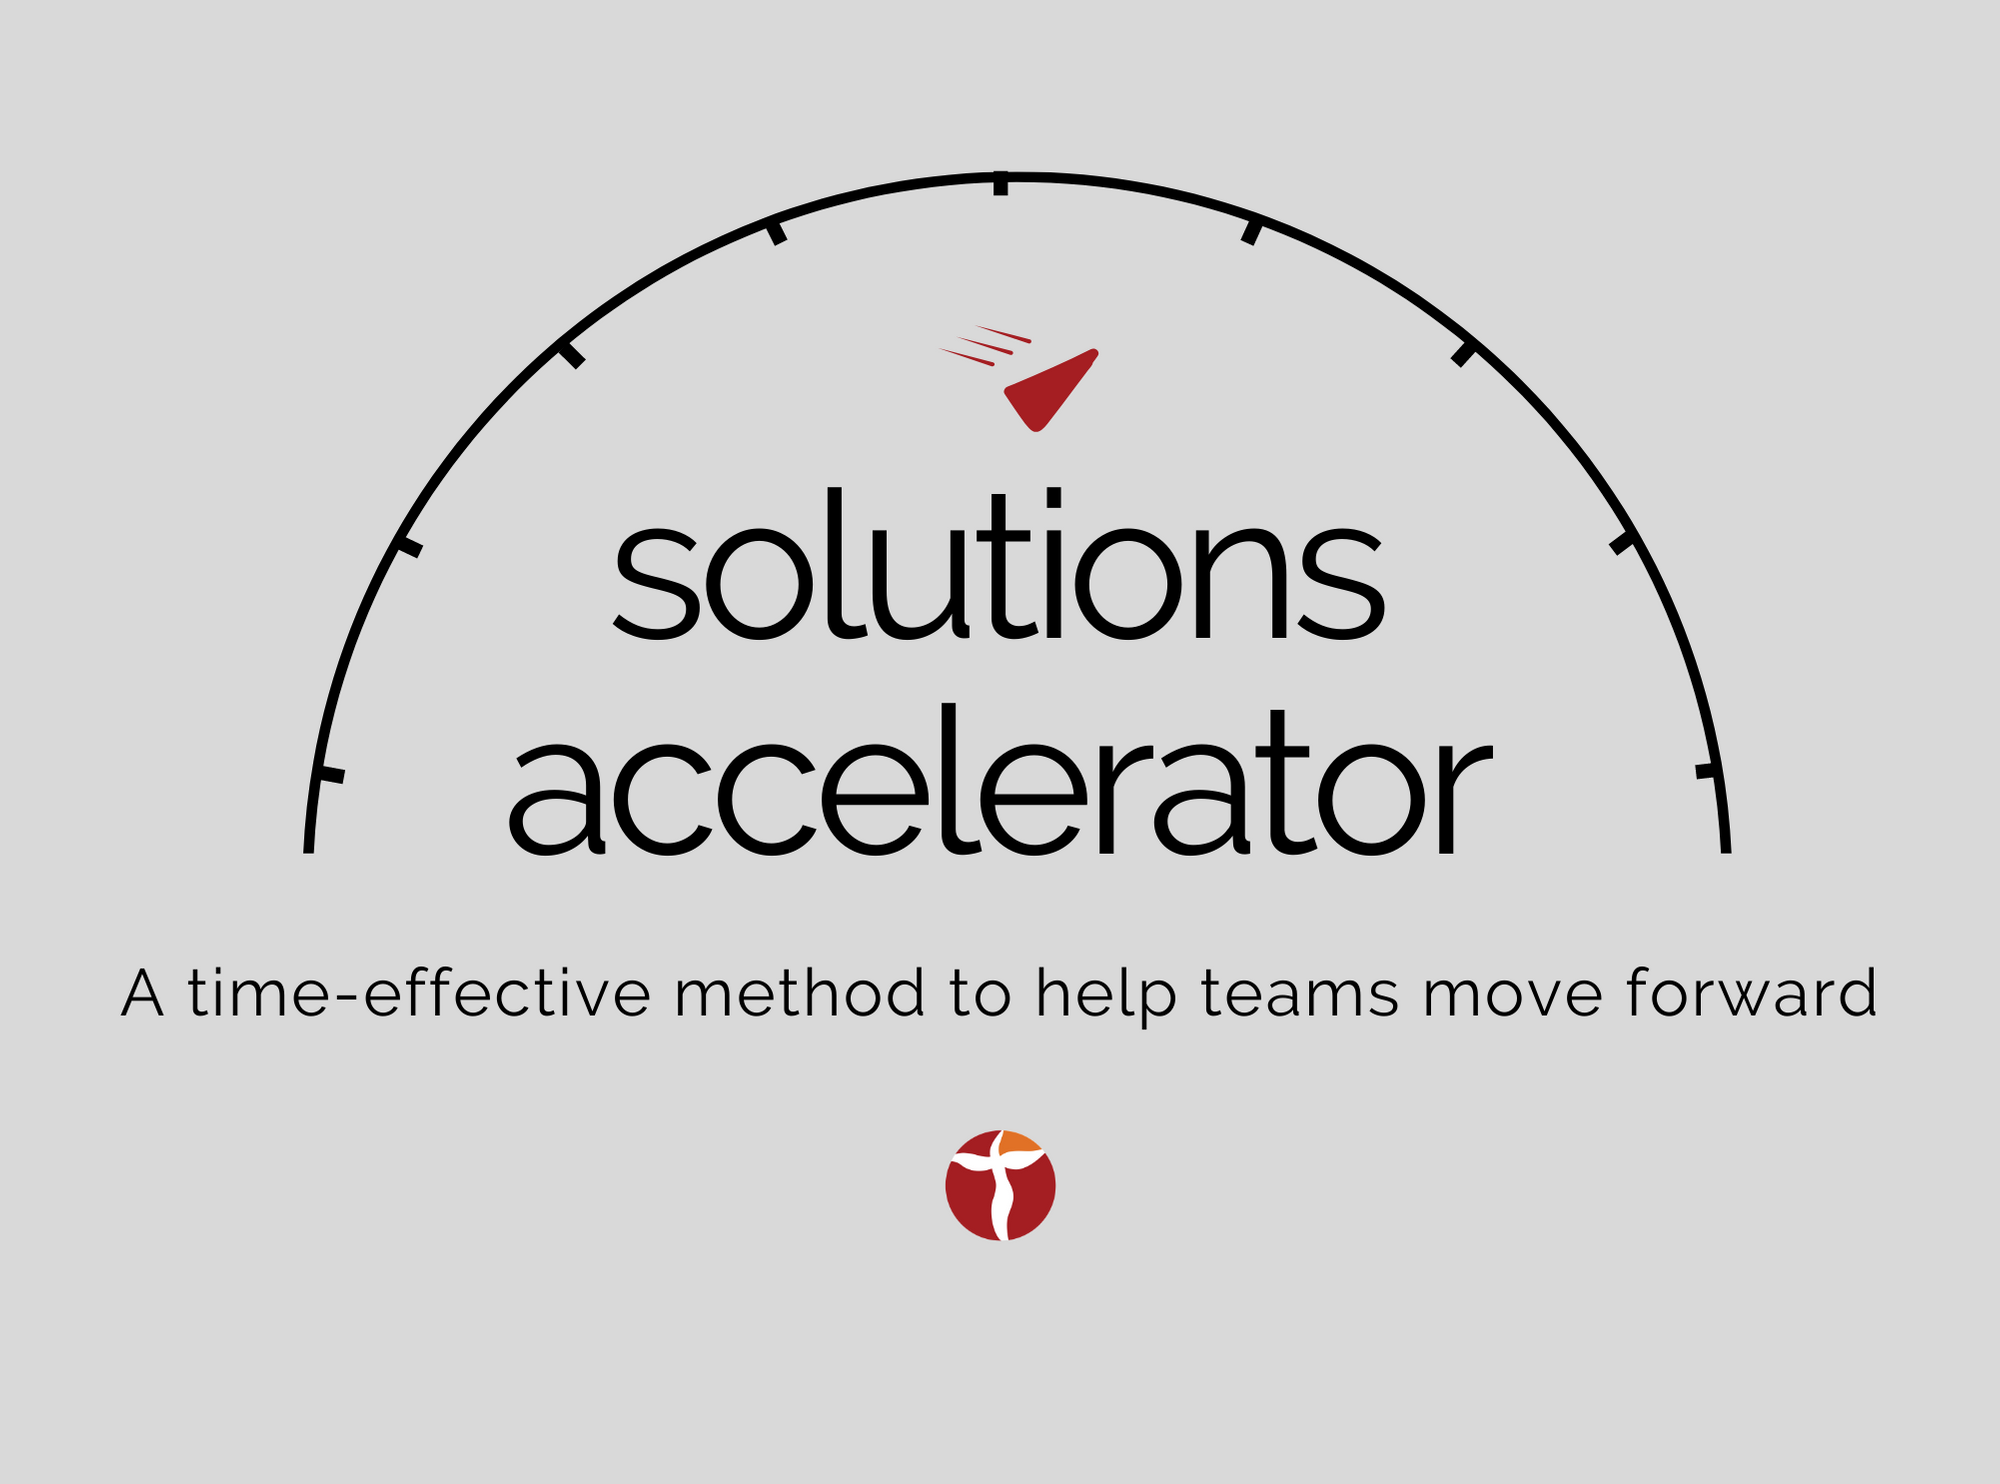 Solutions Accelerator. A time-effective method to help teams move forward